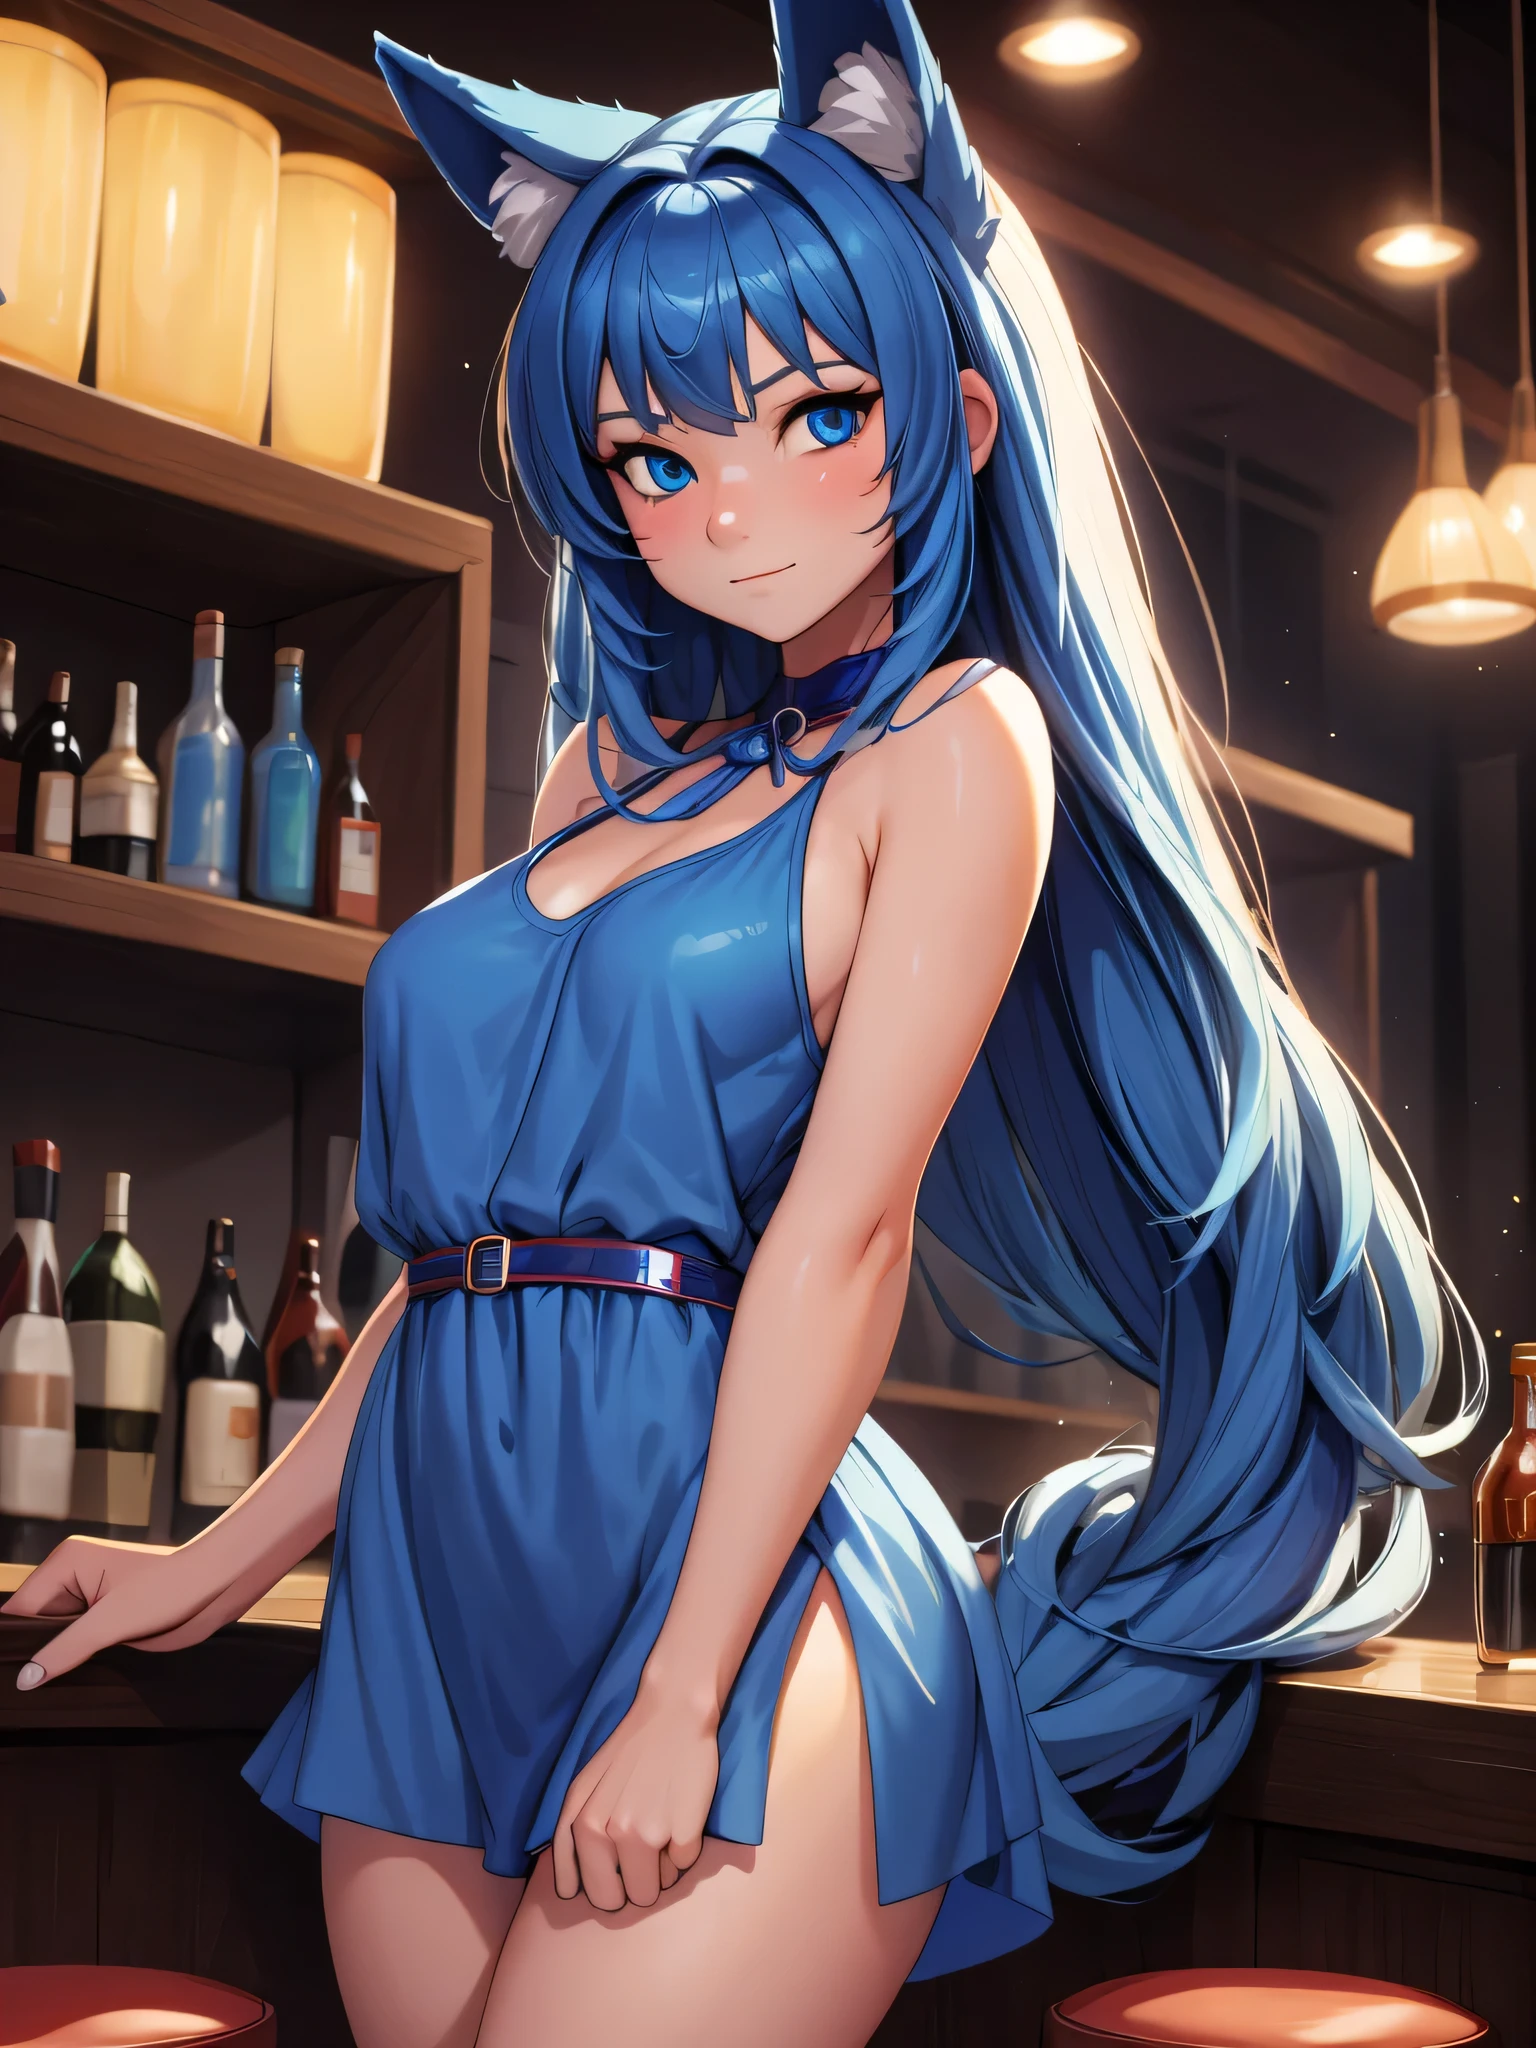 (Masterpiece) (High Detail) (High Res) A close up of short  humanoid girl with pale human skin and blue eyes and long blue hair and blue dog ears and a big fluffy dog tail and small average breasts. British face. She is stood alone against the bar in a nightclub and is wearing a blue sequin covered dress. She looks shy.